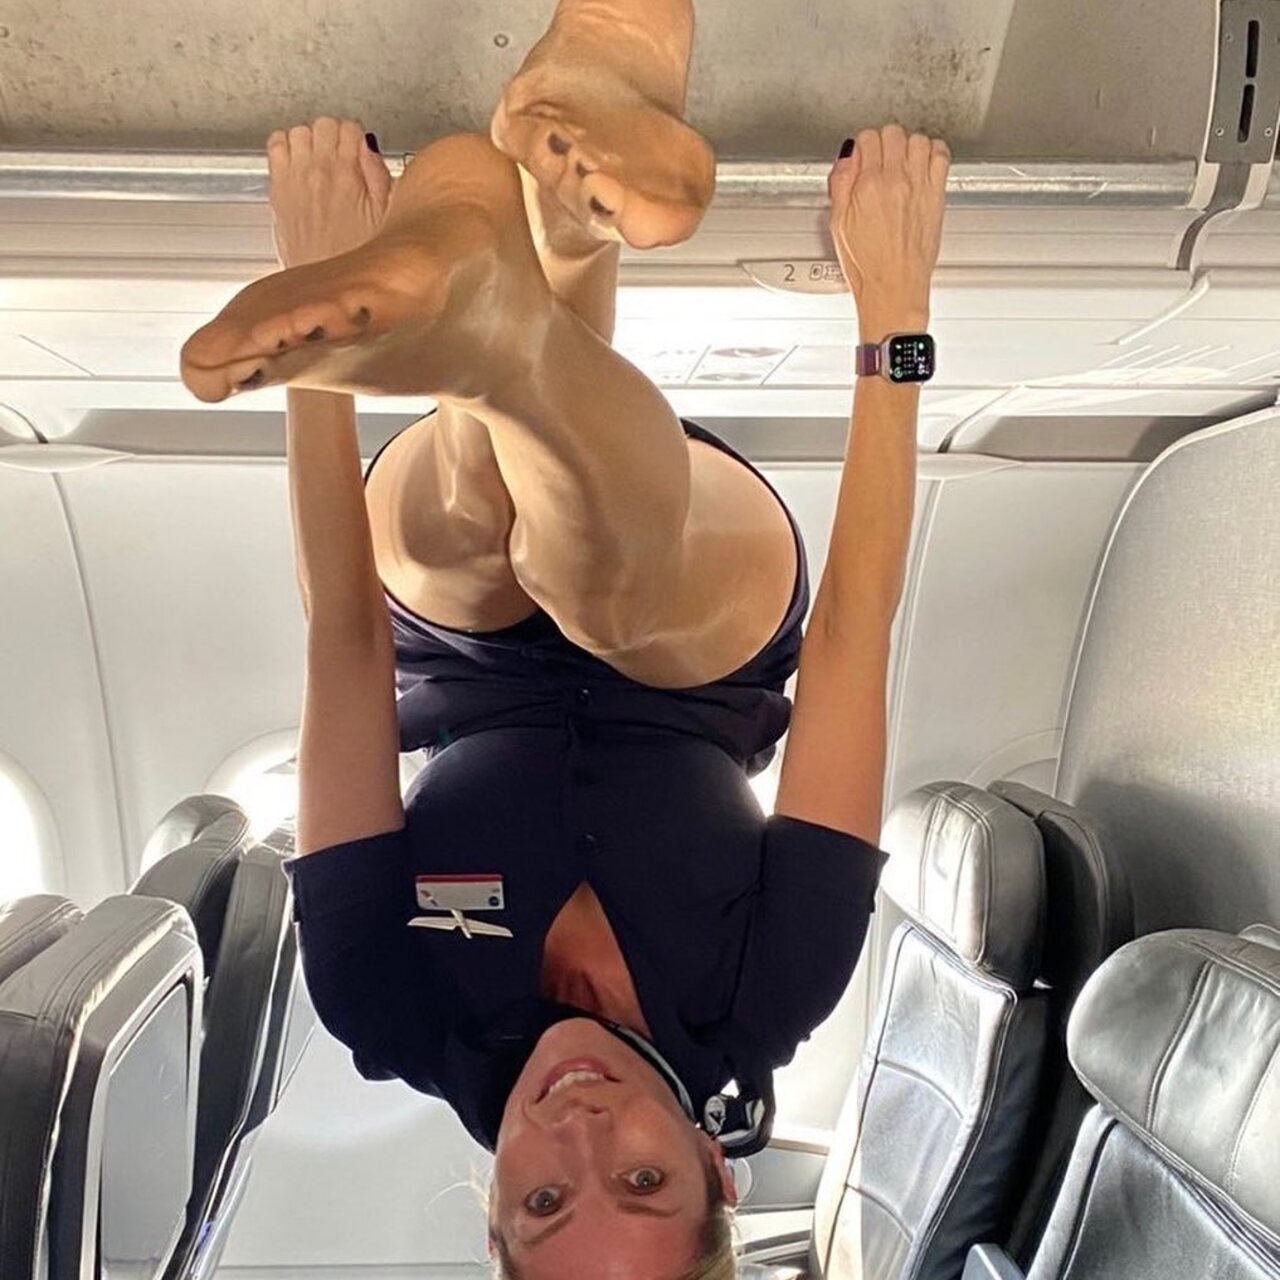 Exploring High Above: The Flight Attendant and Her In-Flight Liaisons